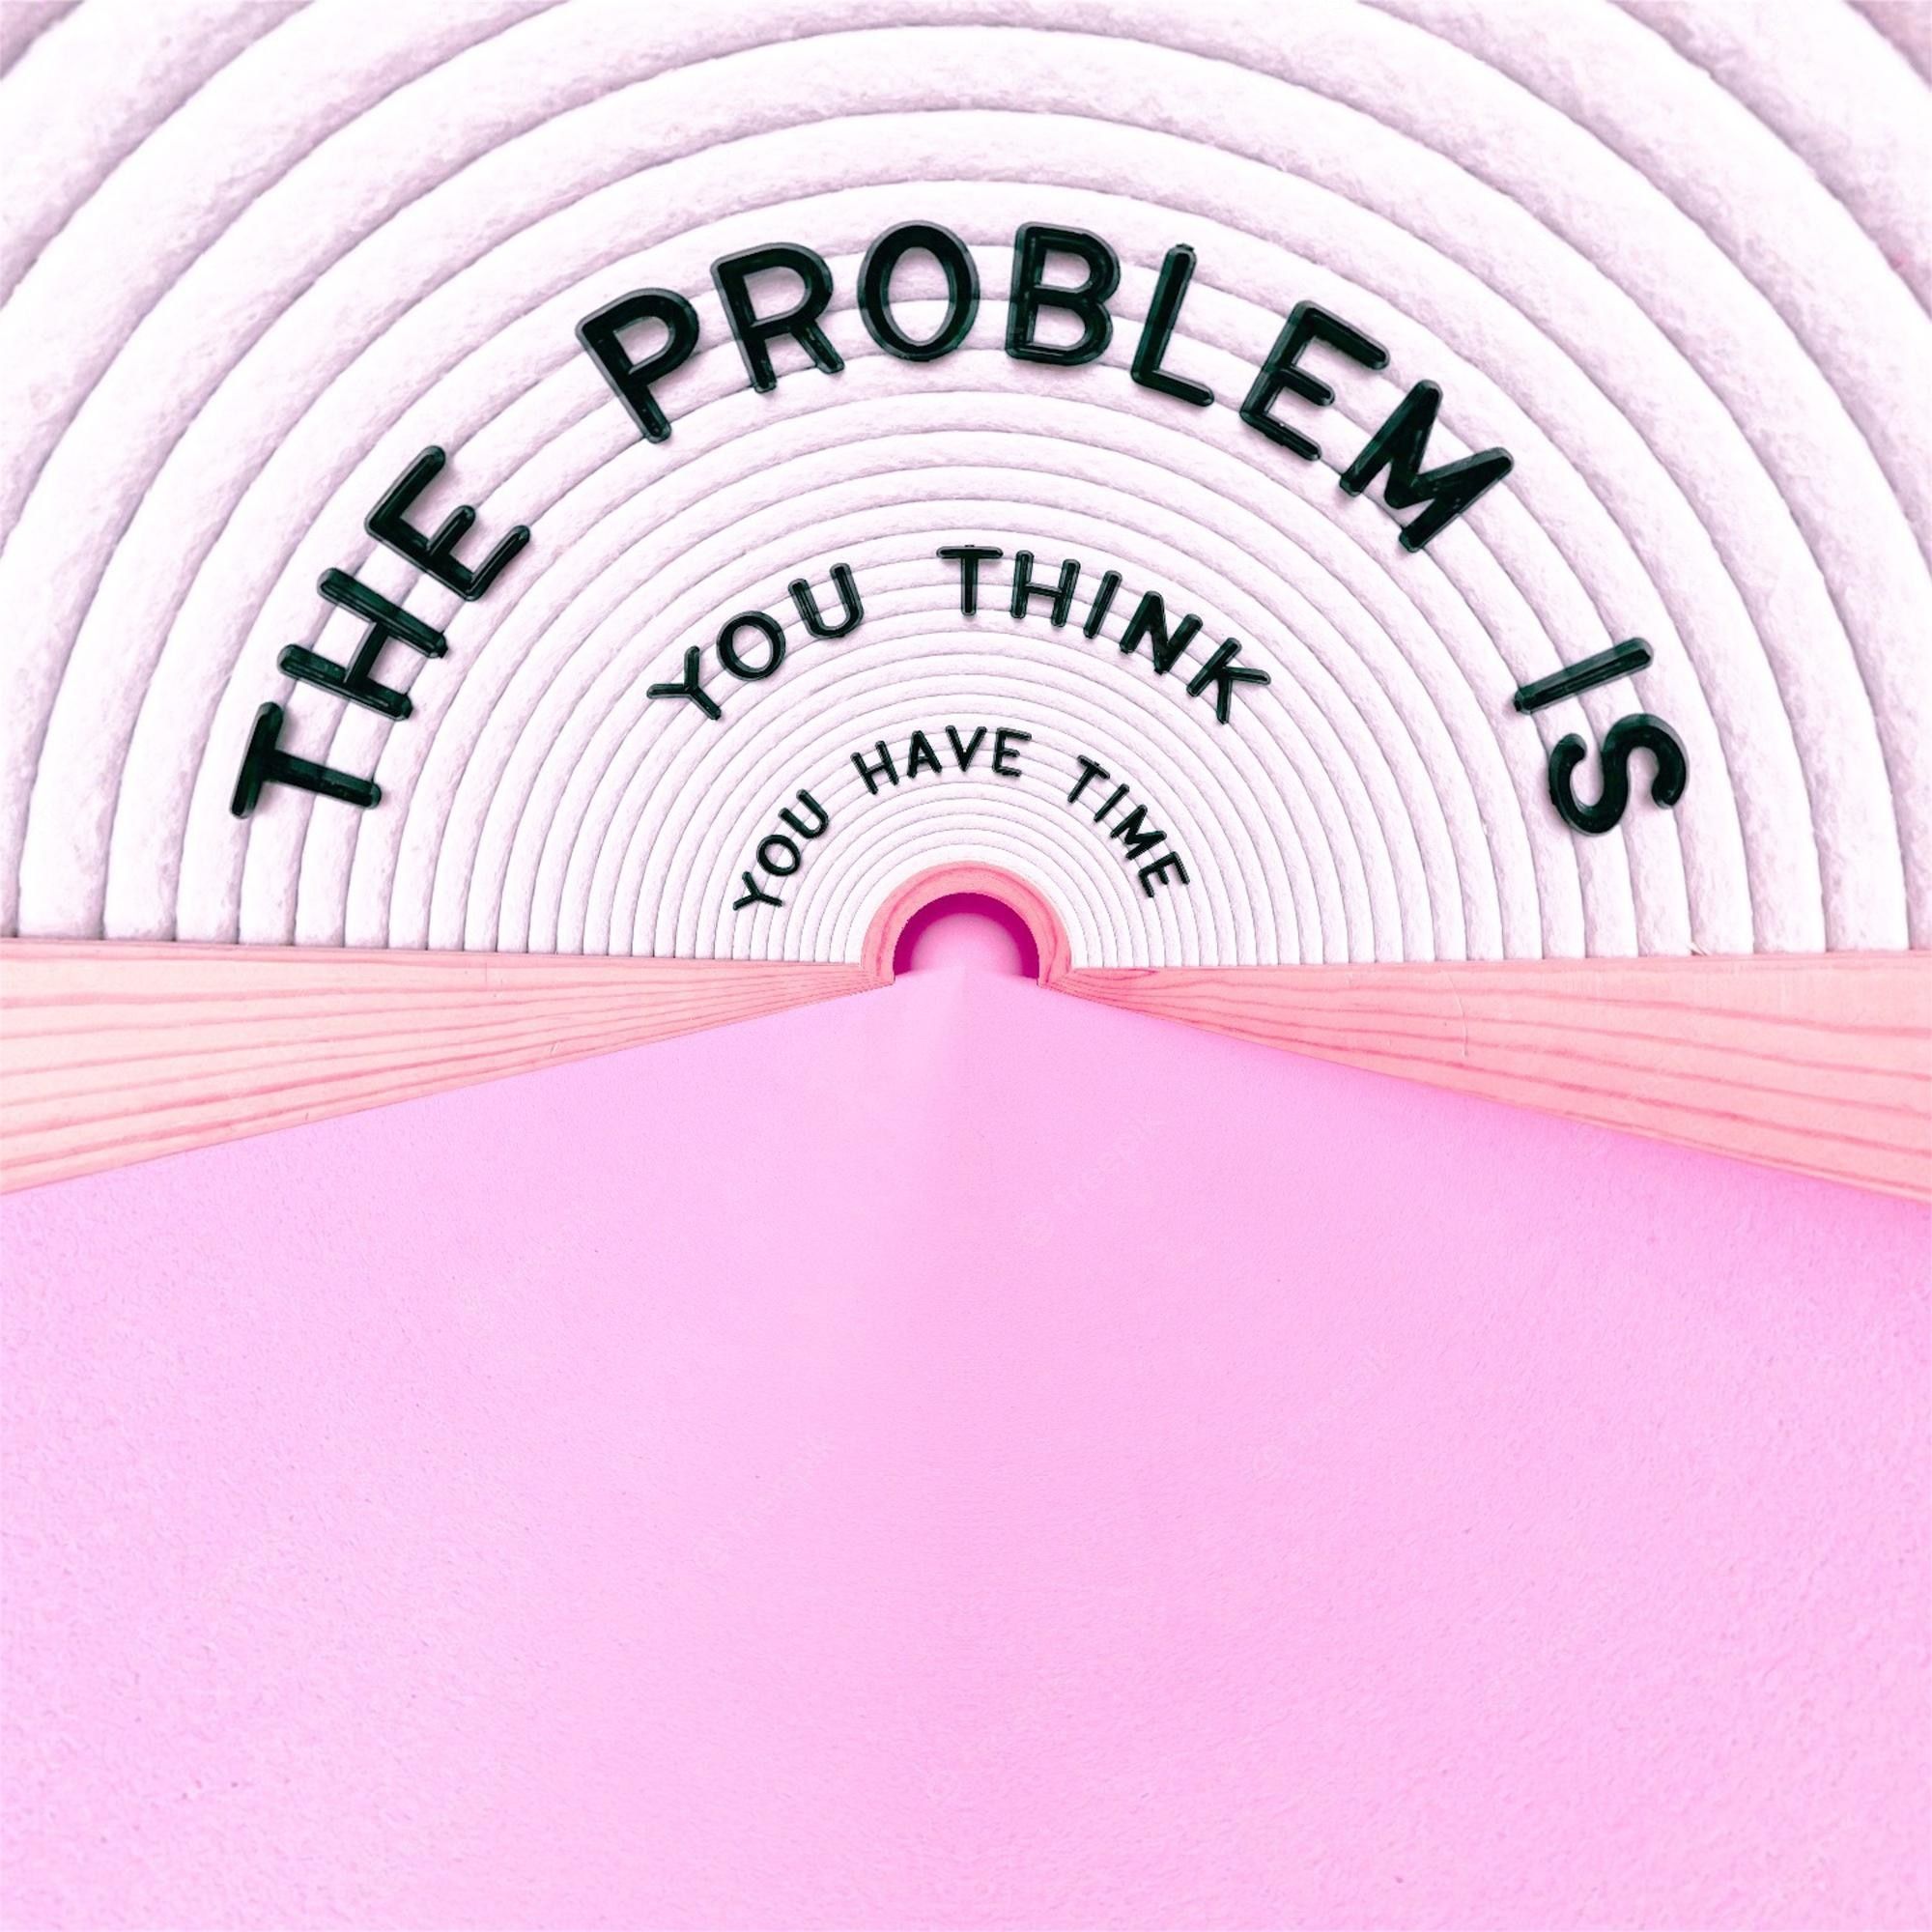 The problem is you think too much - Motivational